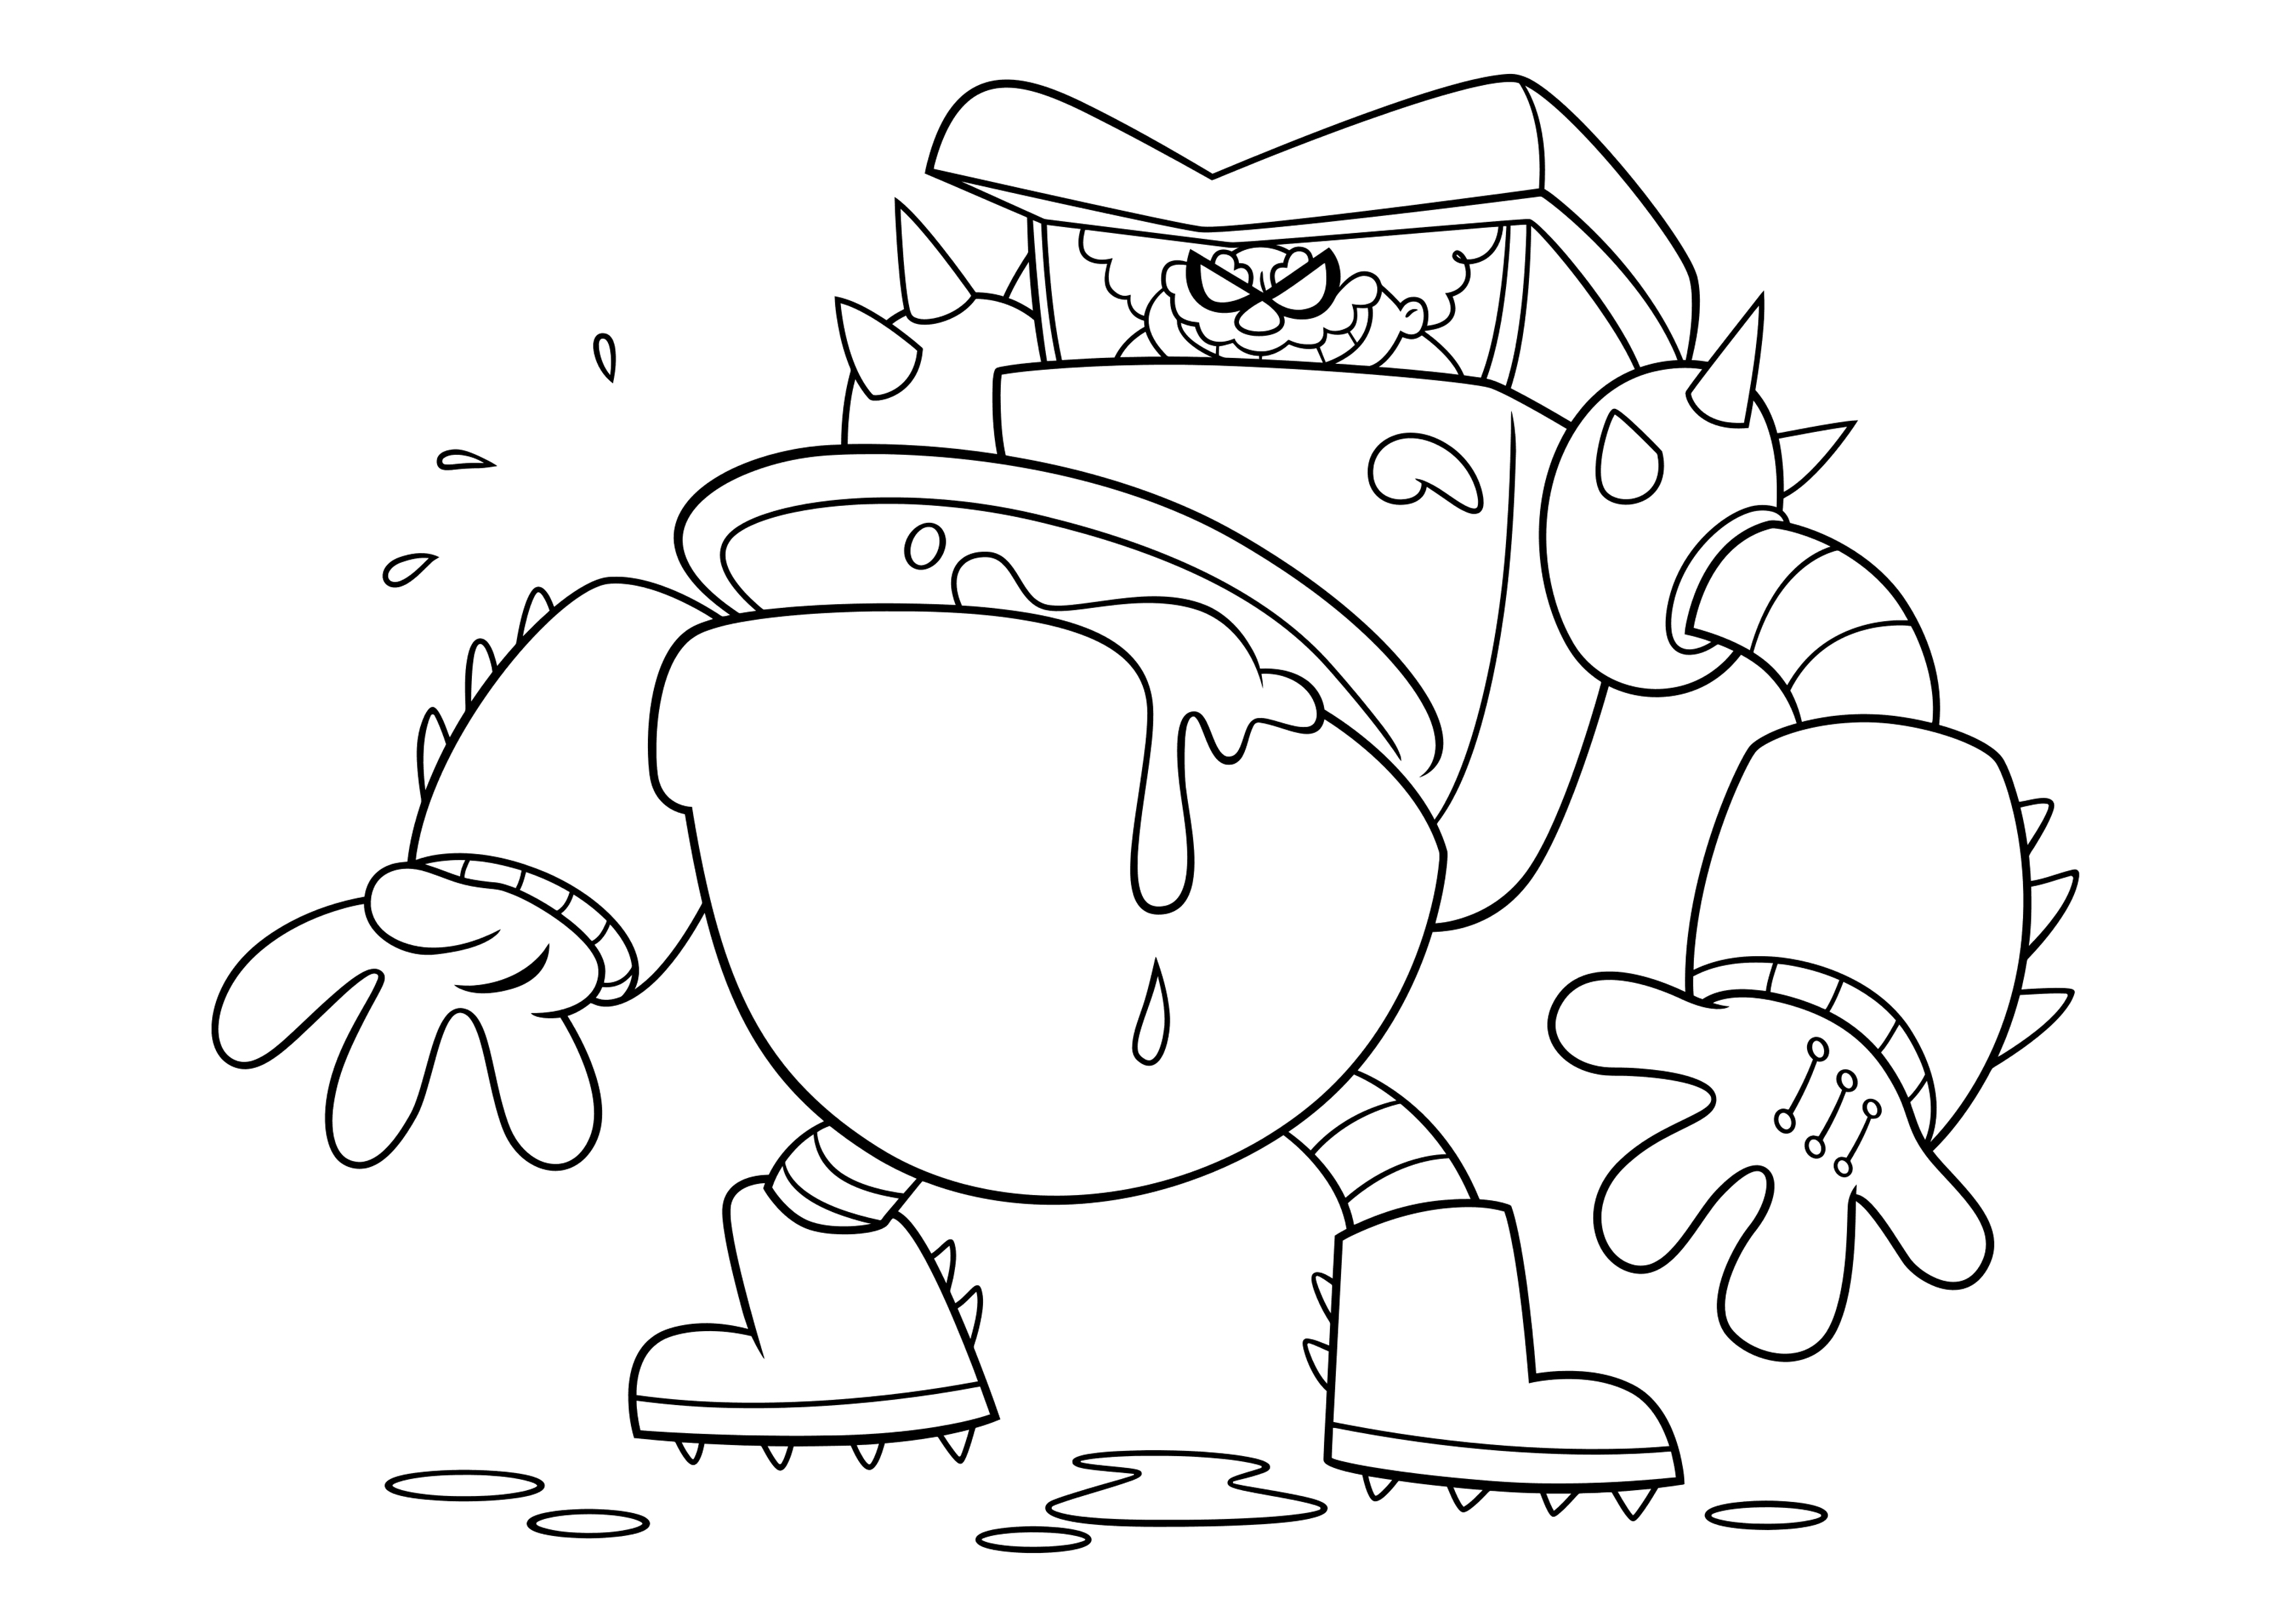 Captain Underpants - Turbo Toilet 2000 - Coloring Pages 7 | Nutty ...